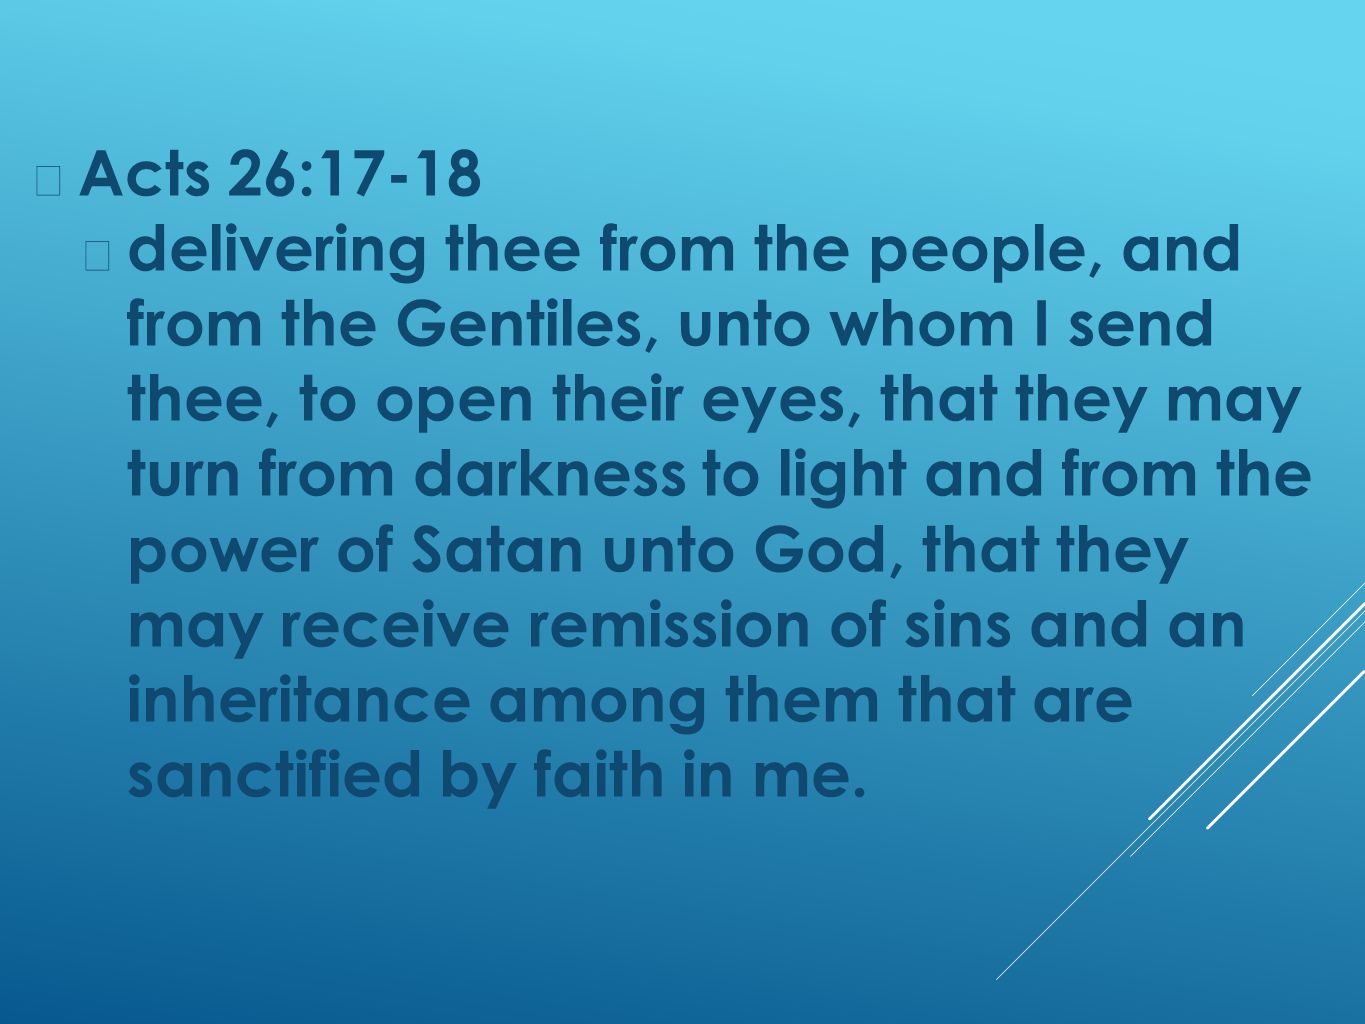 Acts 26:17-18 delivering thee from the people, and from the Gentiles, unto whom I send thee, to open their eyes, that they may turn from darkness to light and from the power of Satan unto God, that they may receive remission of sins and an inheritance among them that are sanctified by faith in me.